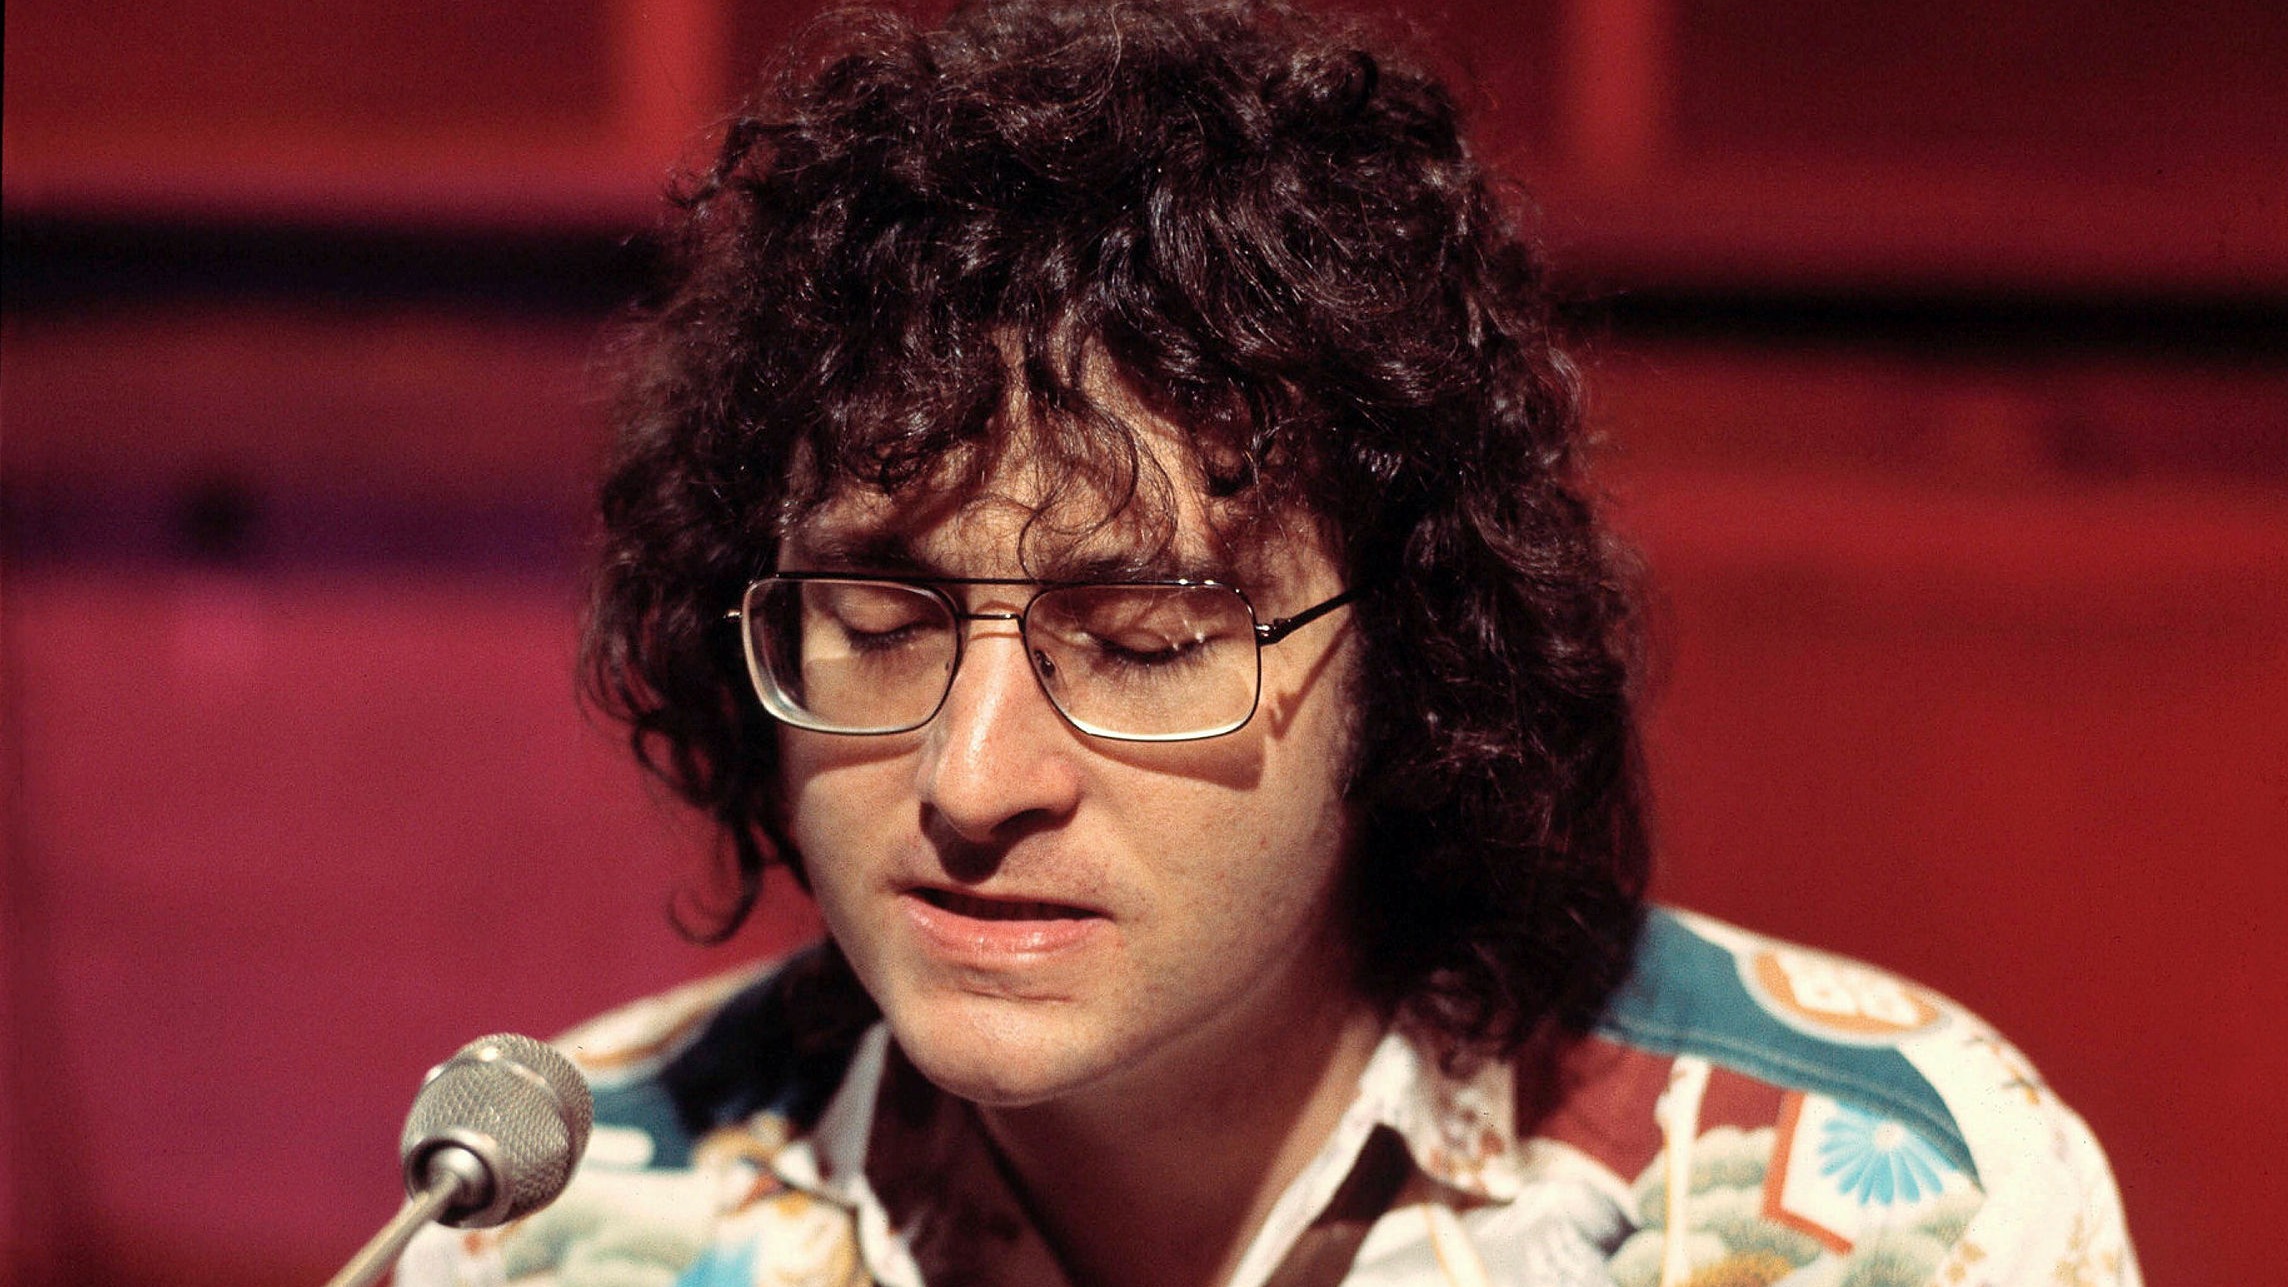 You Can Leave Your Hat On — how Randy Newman struck gold with sex — FT picture